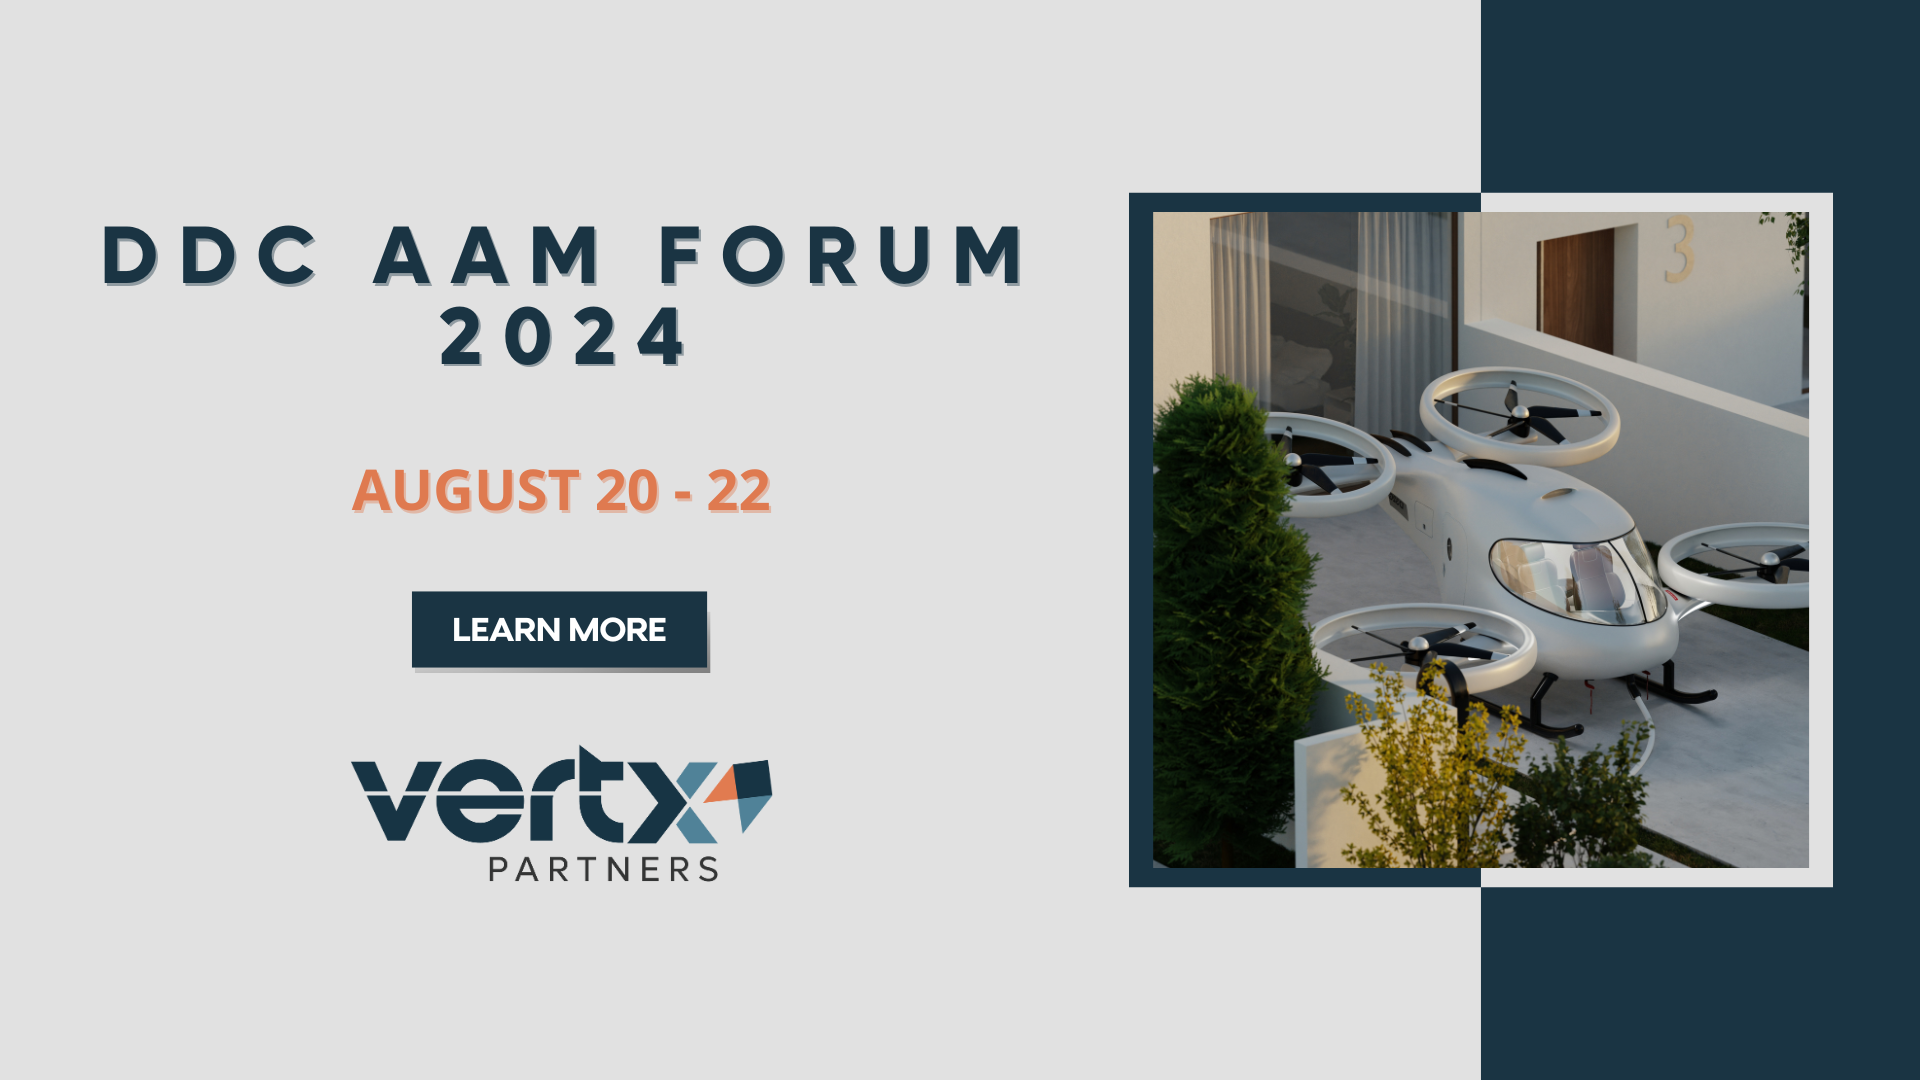 This graphic has the title DDC AAM Forum 2024 with the dates August 20-22 under it and a photo of an eVTOL next it flying through buildings.